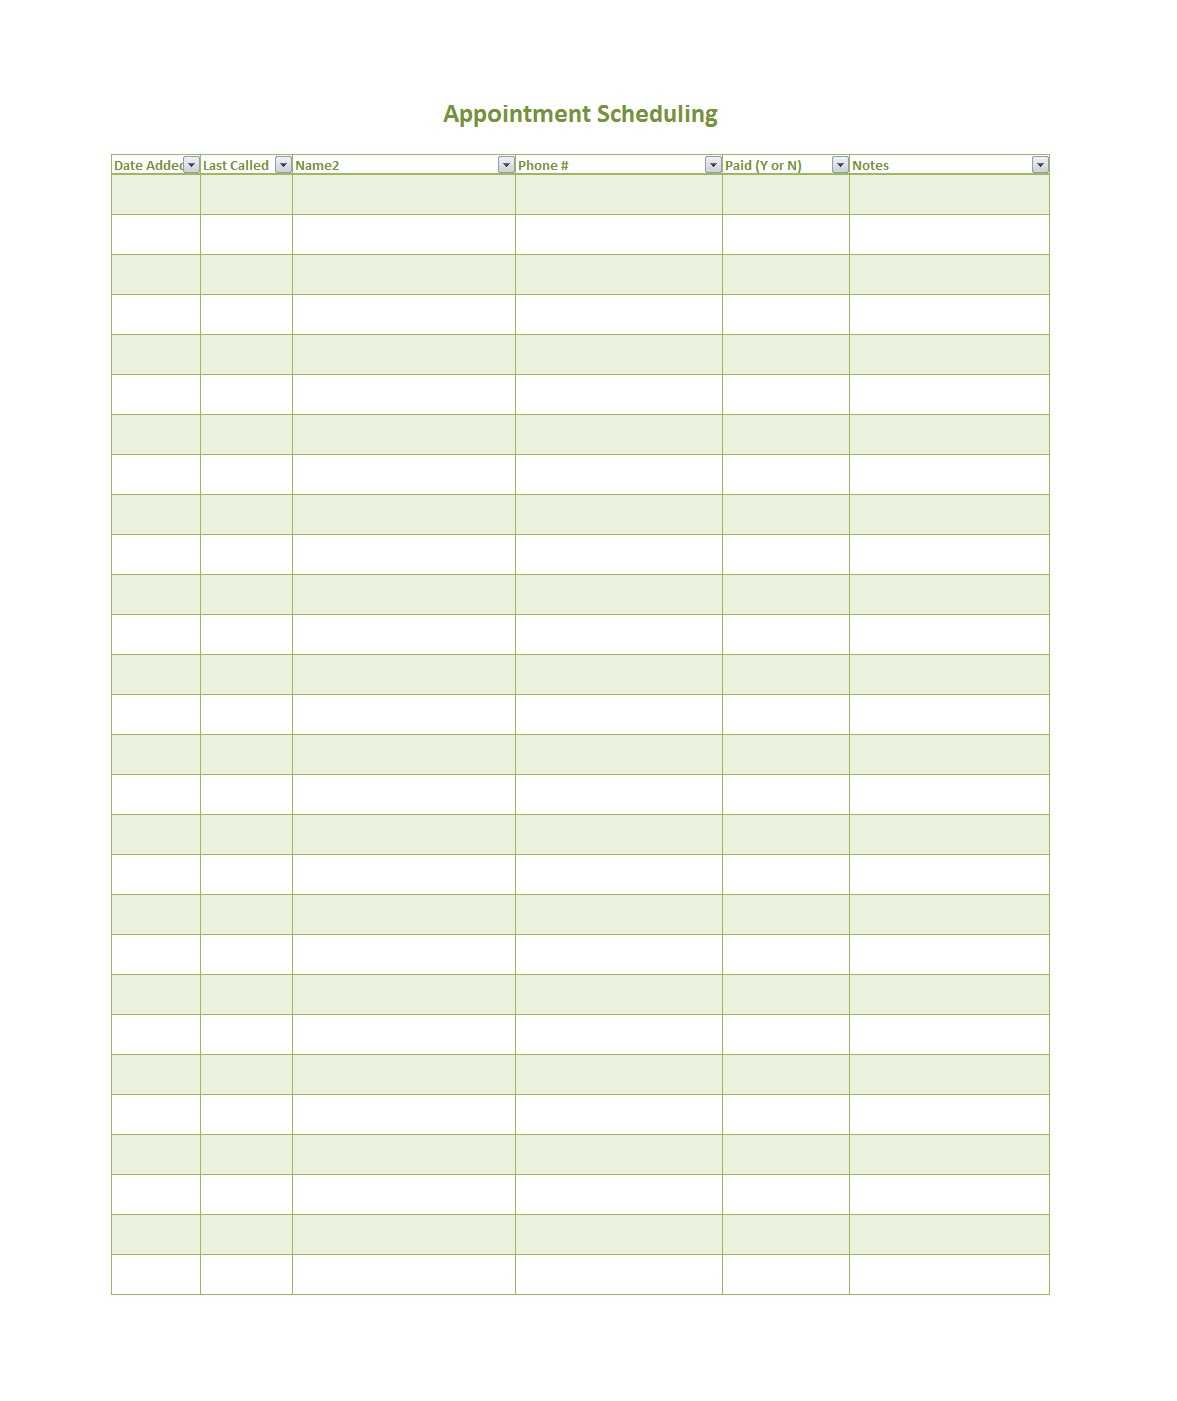 45 Printable Appointment Schedule Templates Appointment With 